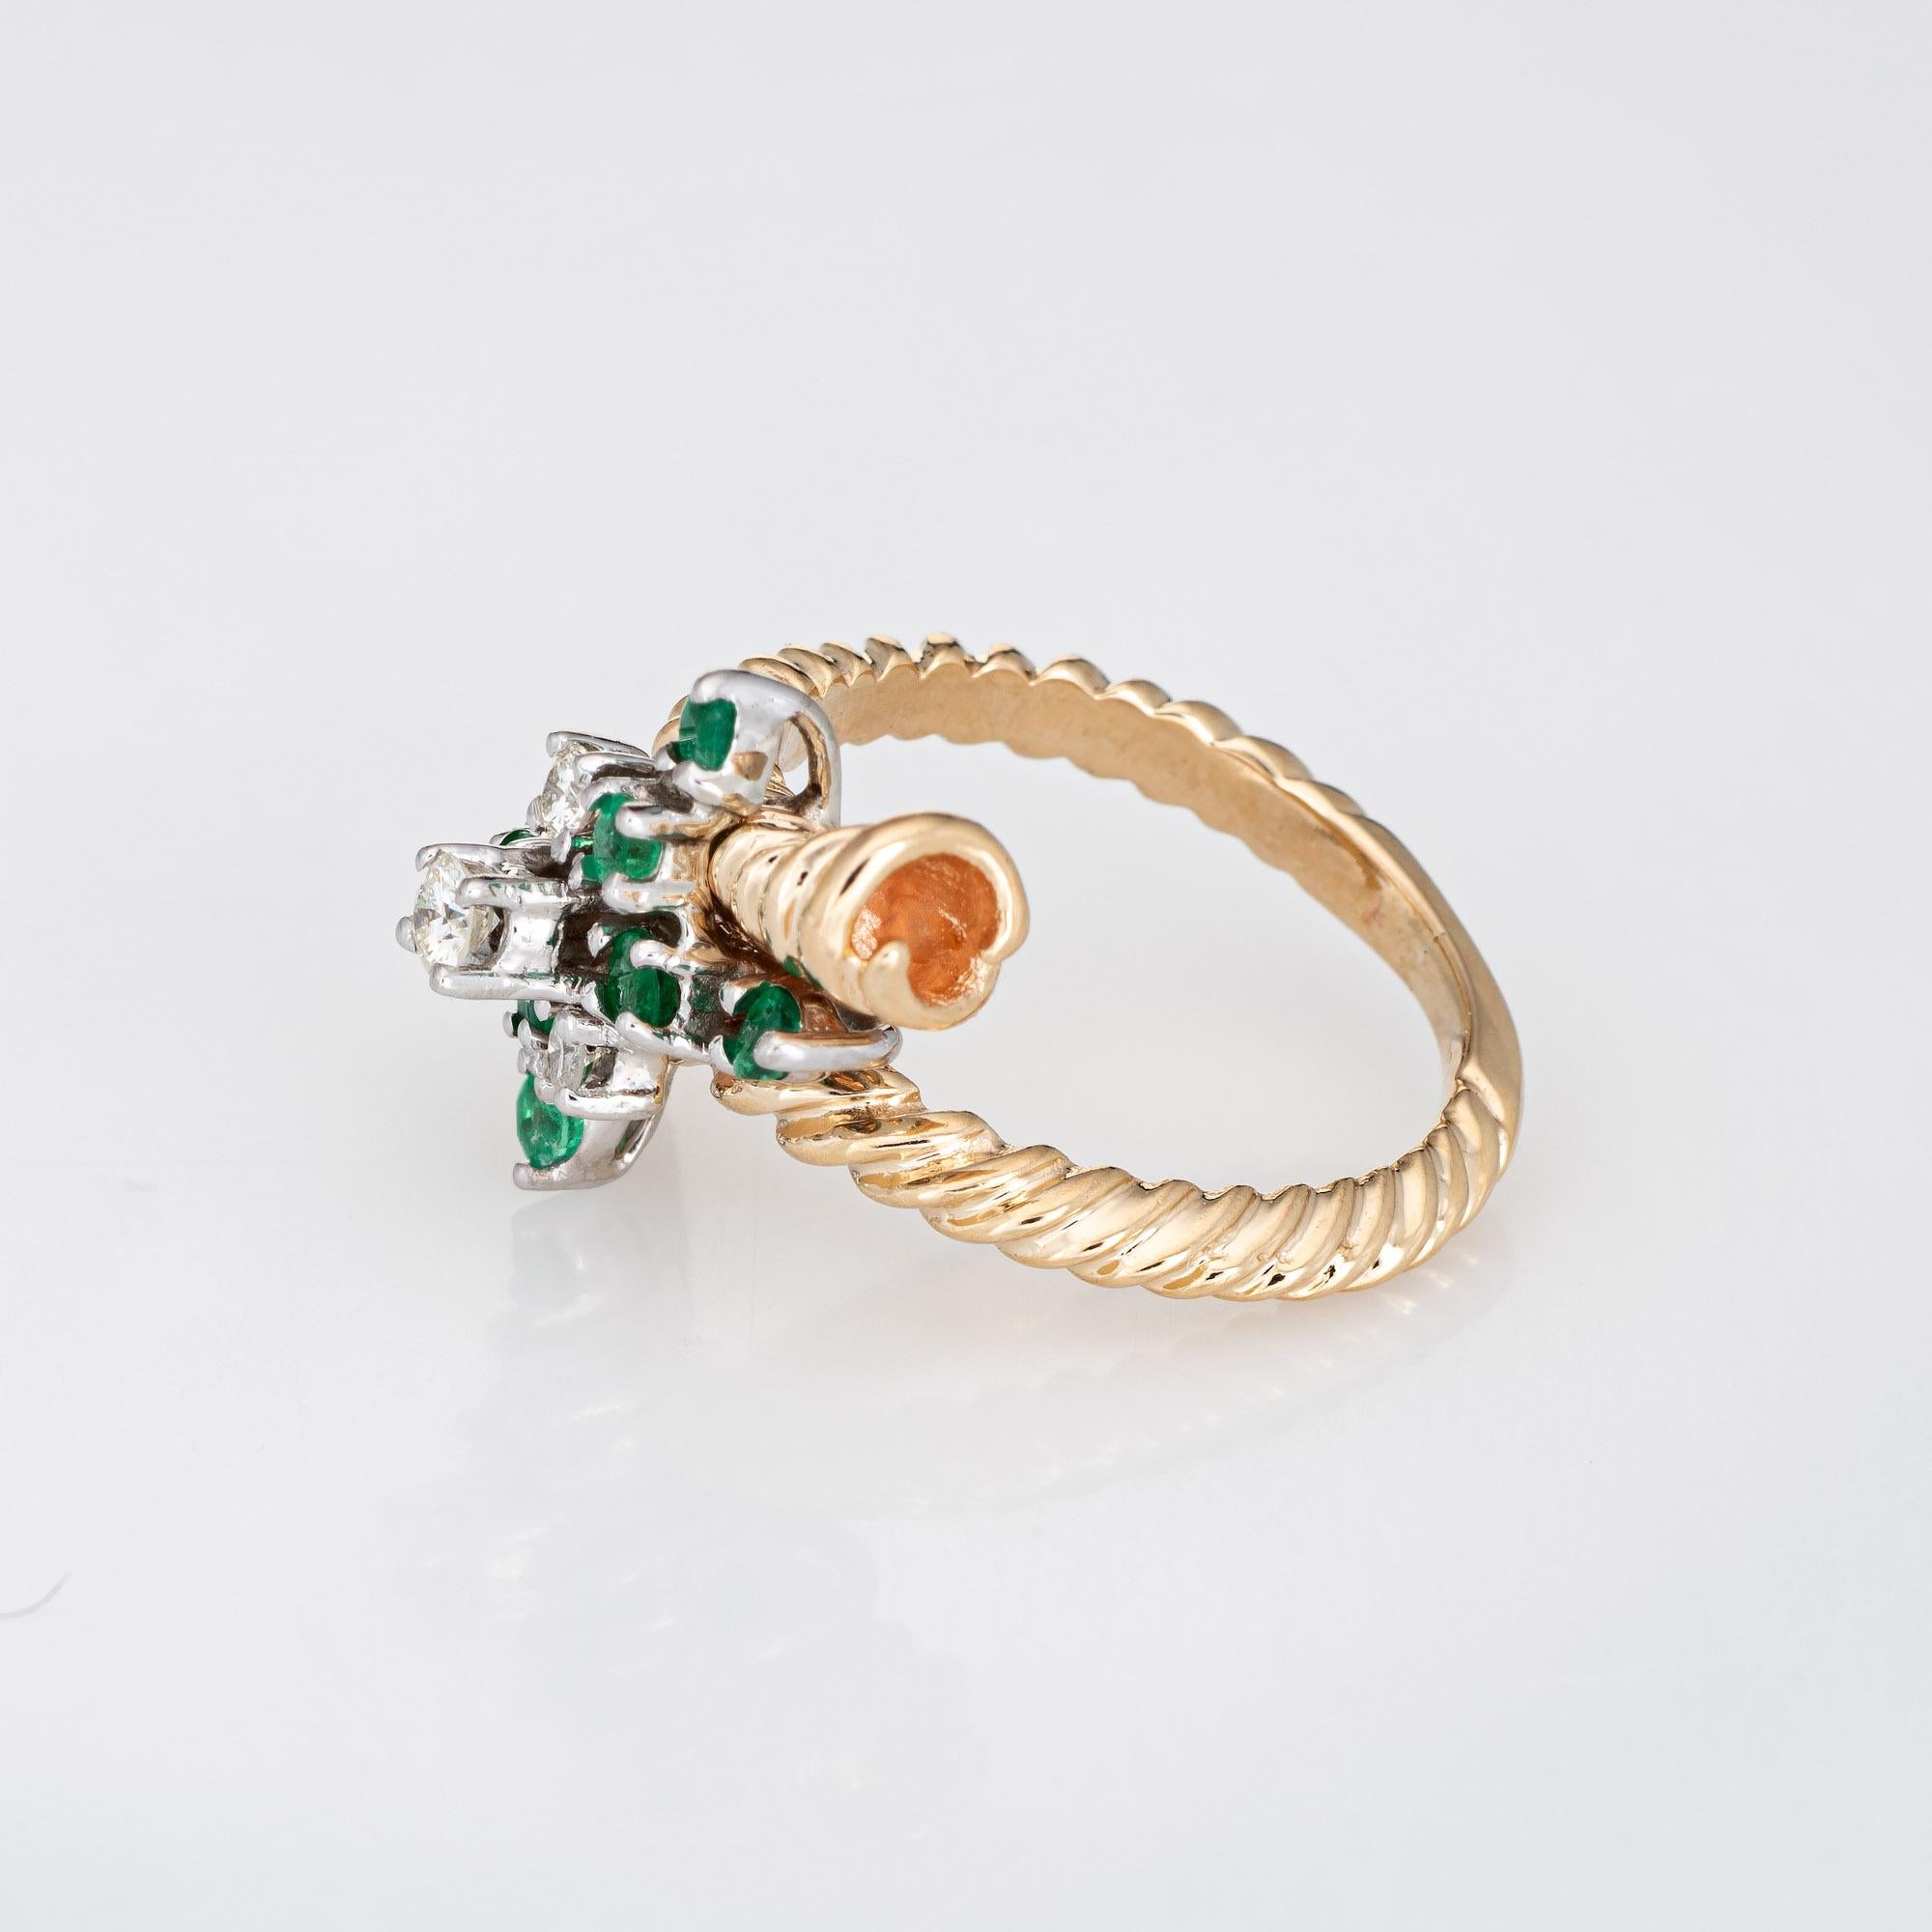 Taille ronde Vintage Emerald Diamond Ring Cluster 14k Yellow Gold Estate Fine Jewelry en vente